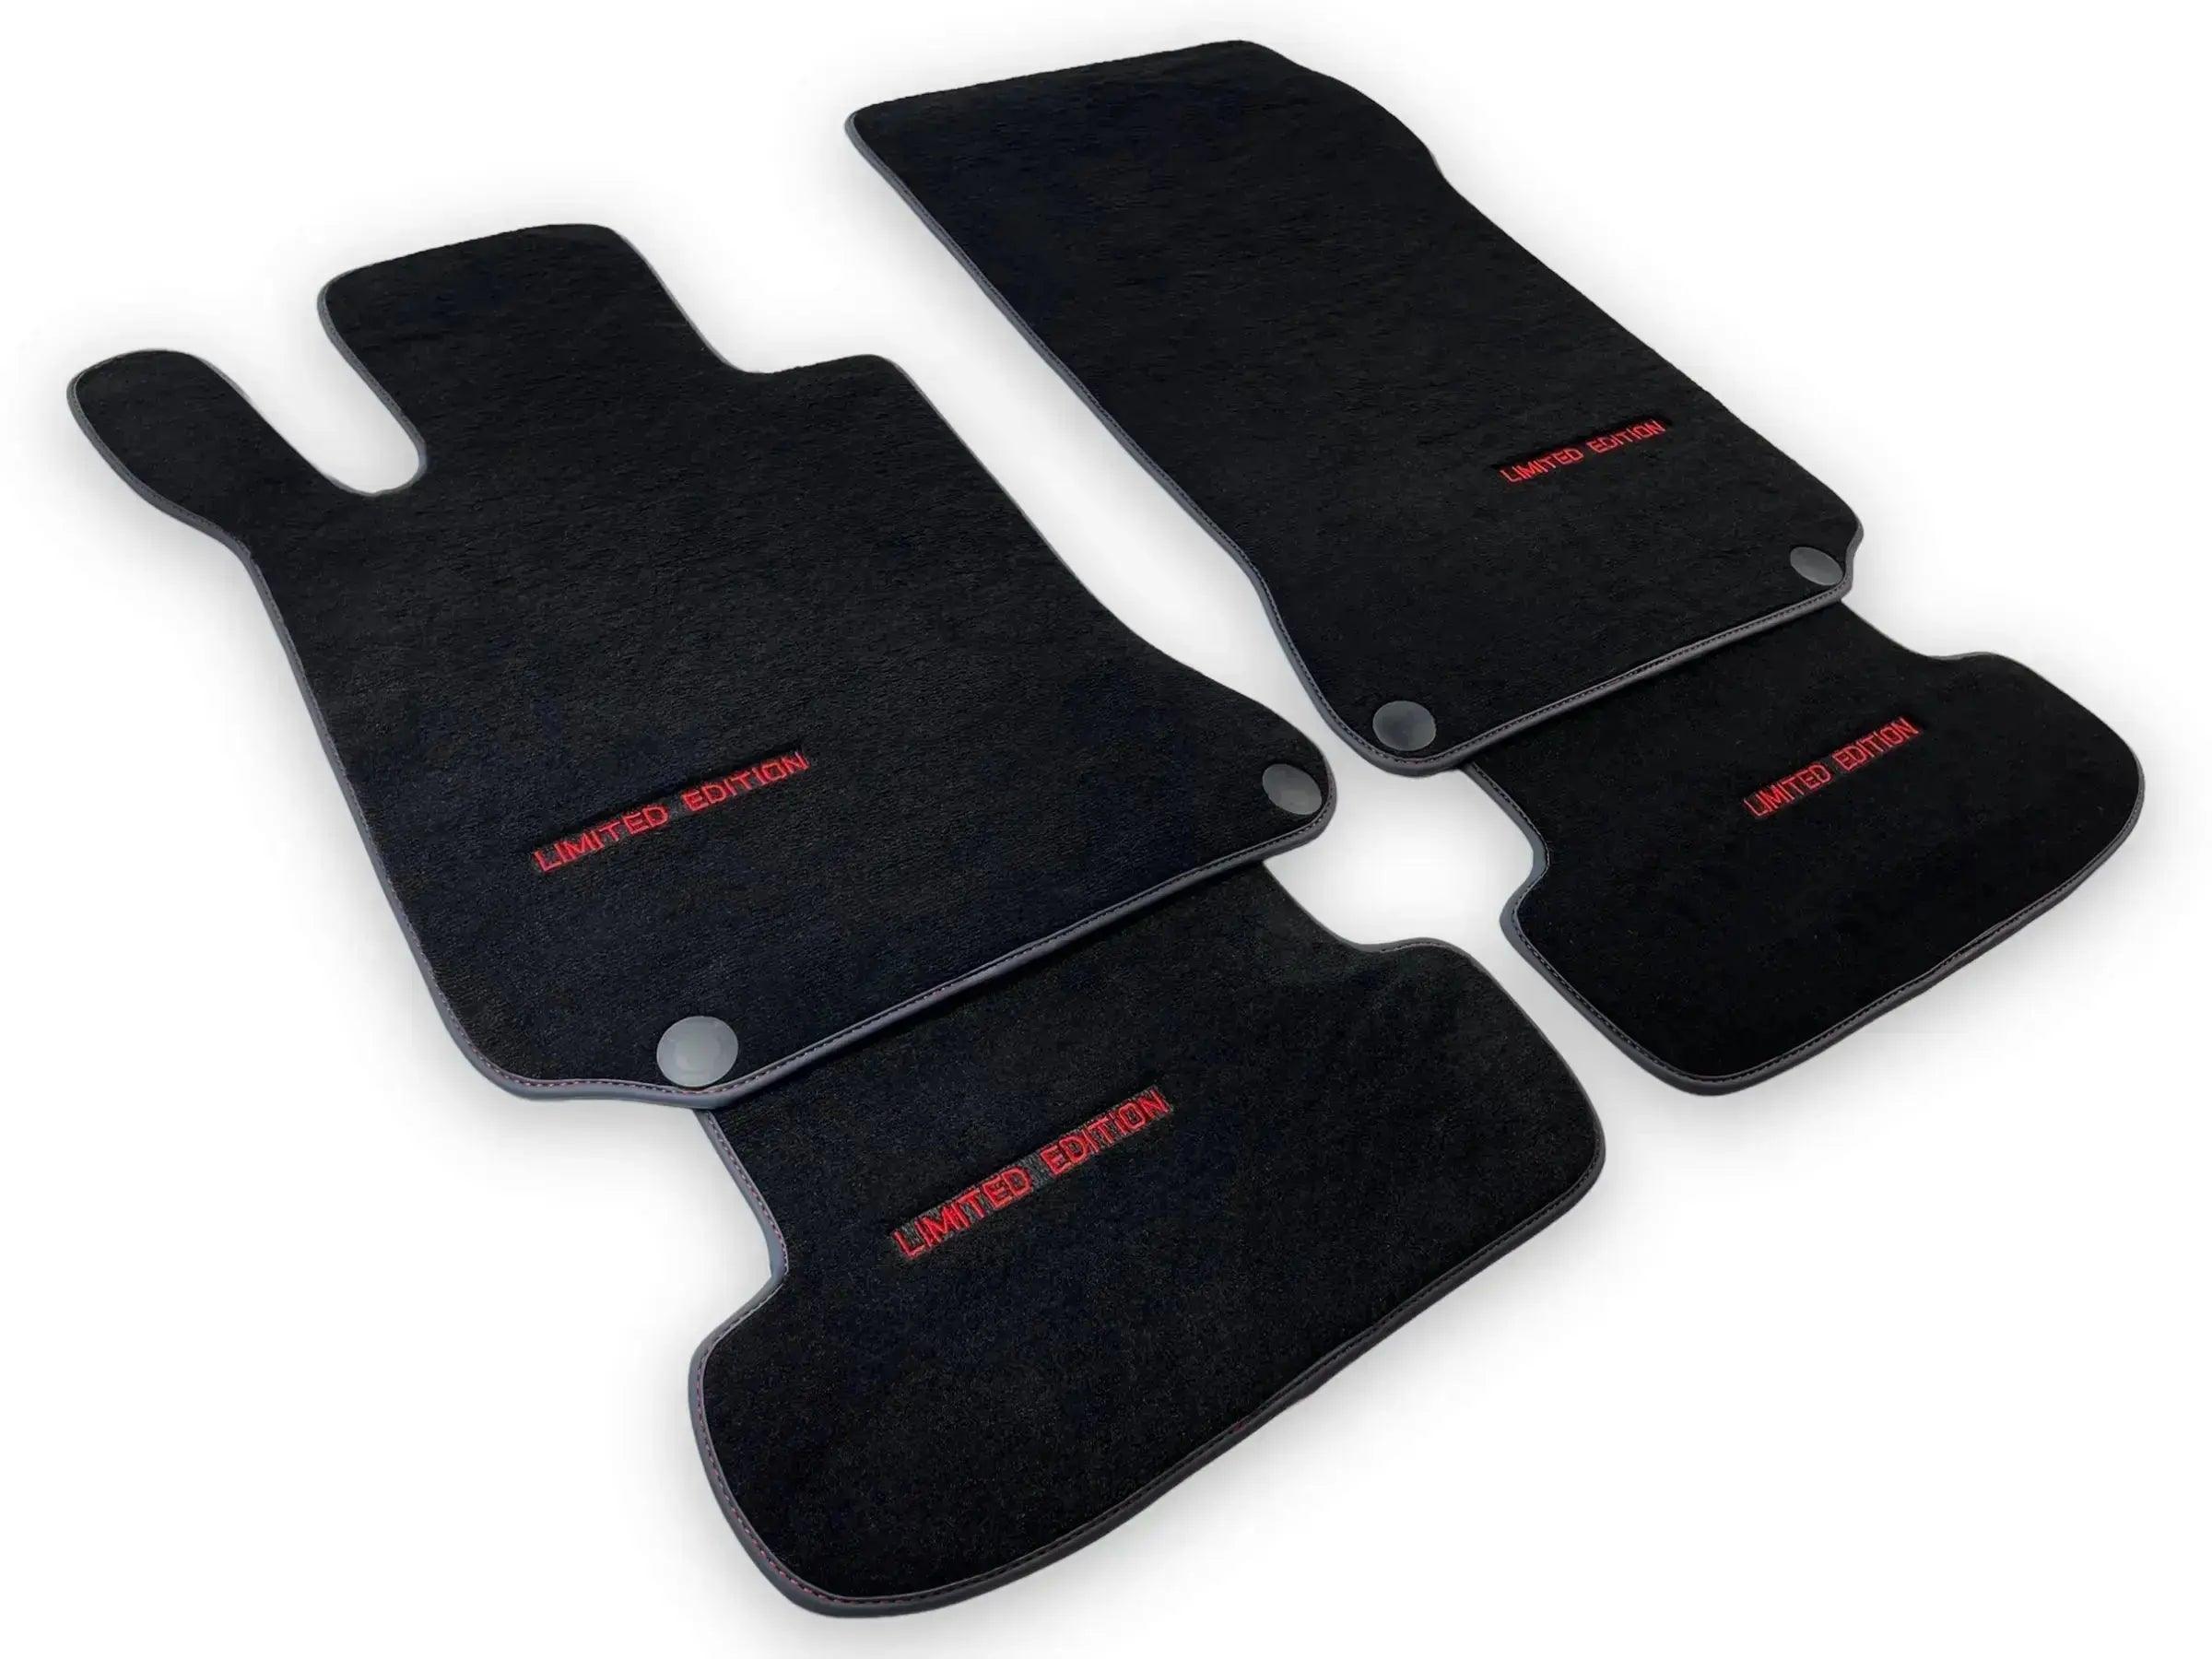 Black Floor Mats For Mercedes Benz S-Class V223 (2021-2023) Hybrid | Limited Edition